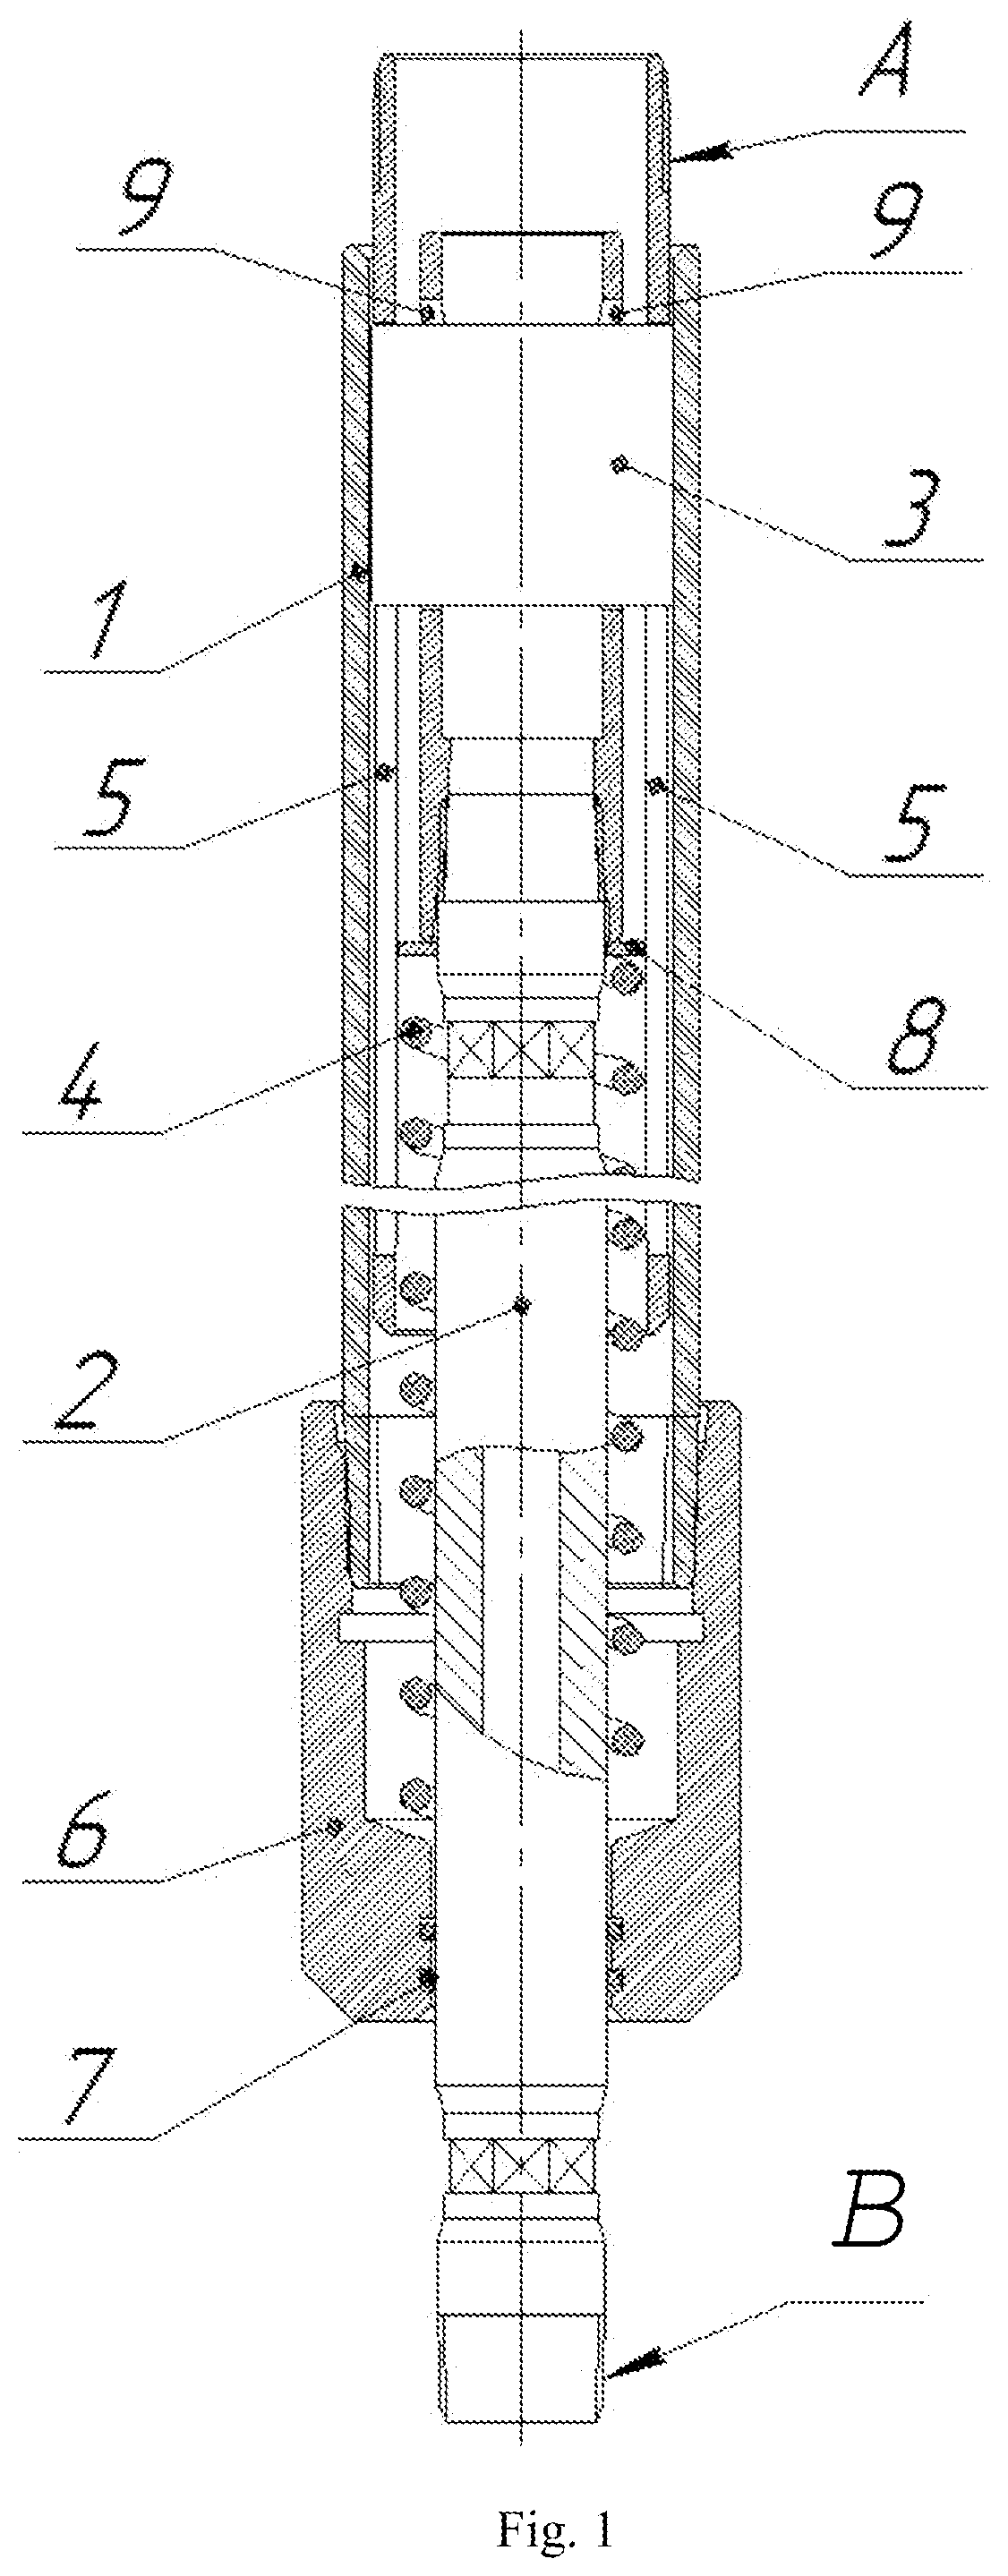 Device for generating an axial load in a drill string assembly